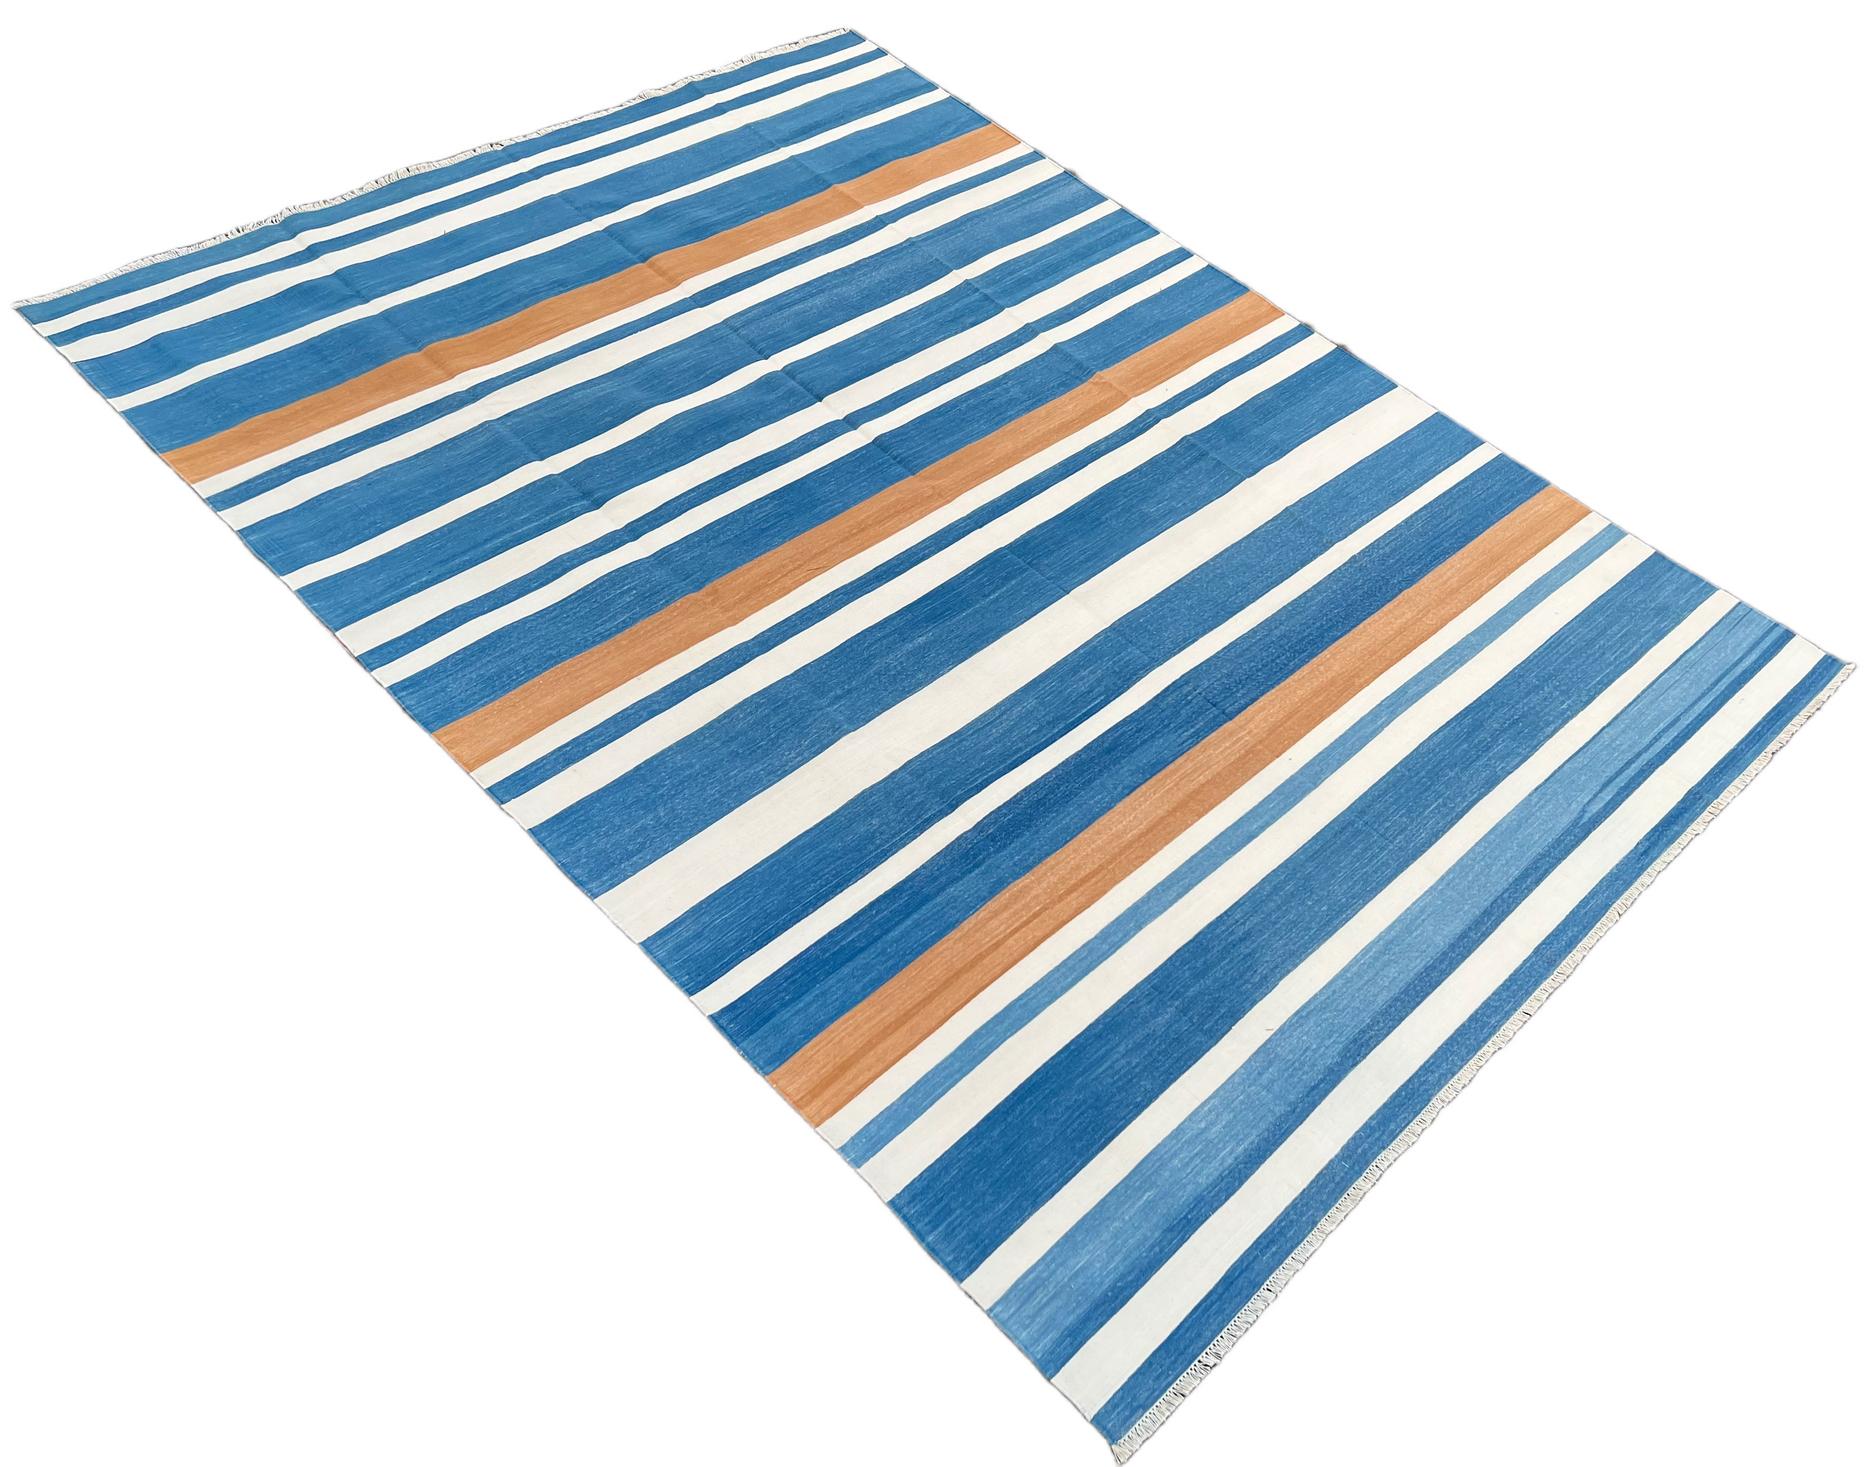 Cotton Vegetable Dyed Indigo Blue, Tan And White Striped Indian Dhurrie Rug-8'x10' 
These special flat-weave dhurries are hand-woven with 15 ply 100% cotton yarn. Due to the special manufacturing techniques used to create our rugs, the size and